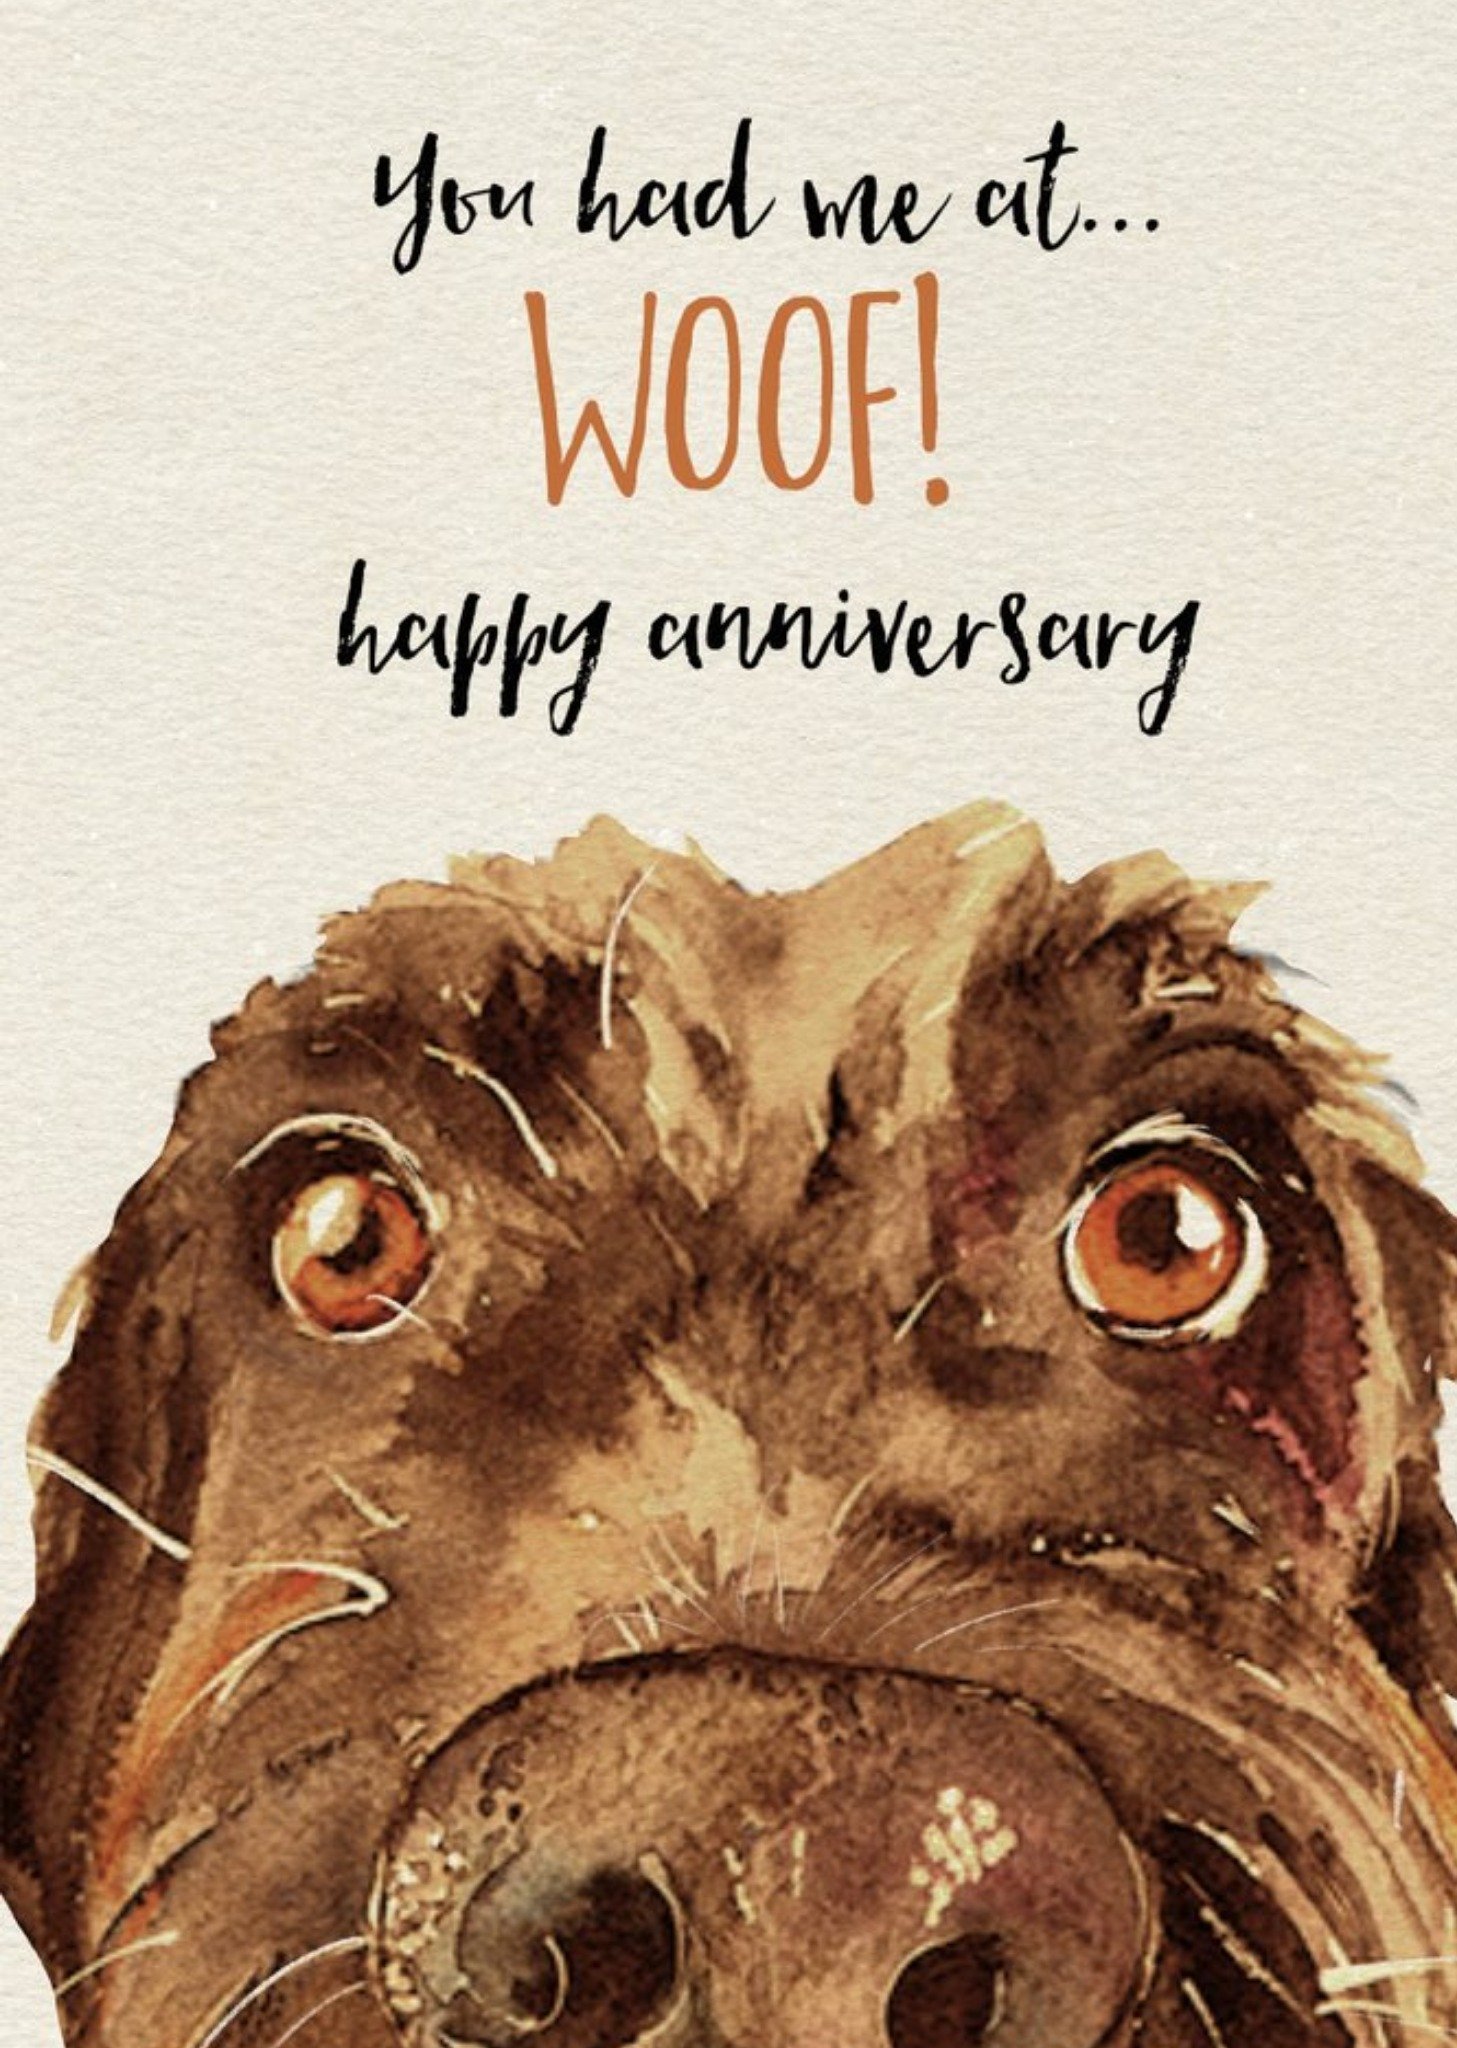 Moonpig Cute Dog Watercolour Illustration You Had Me At Woof Anniversary Card, Large